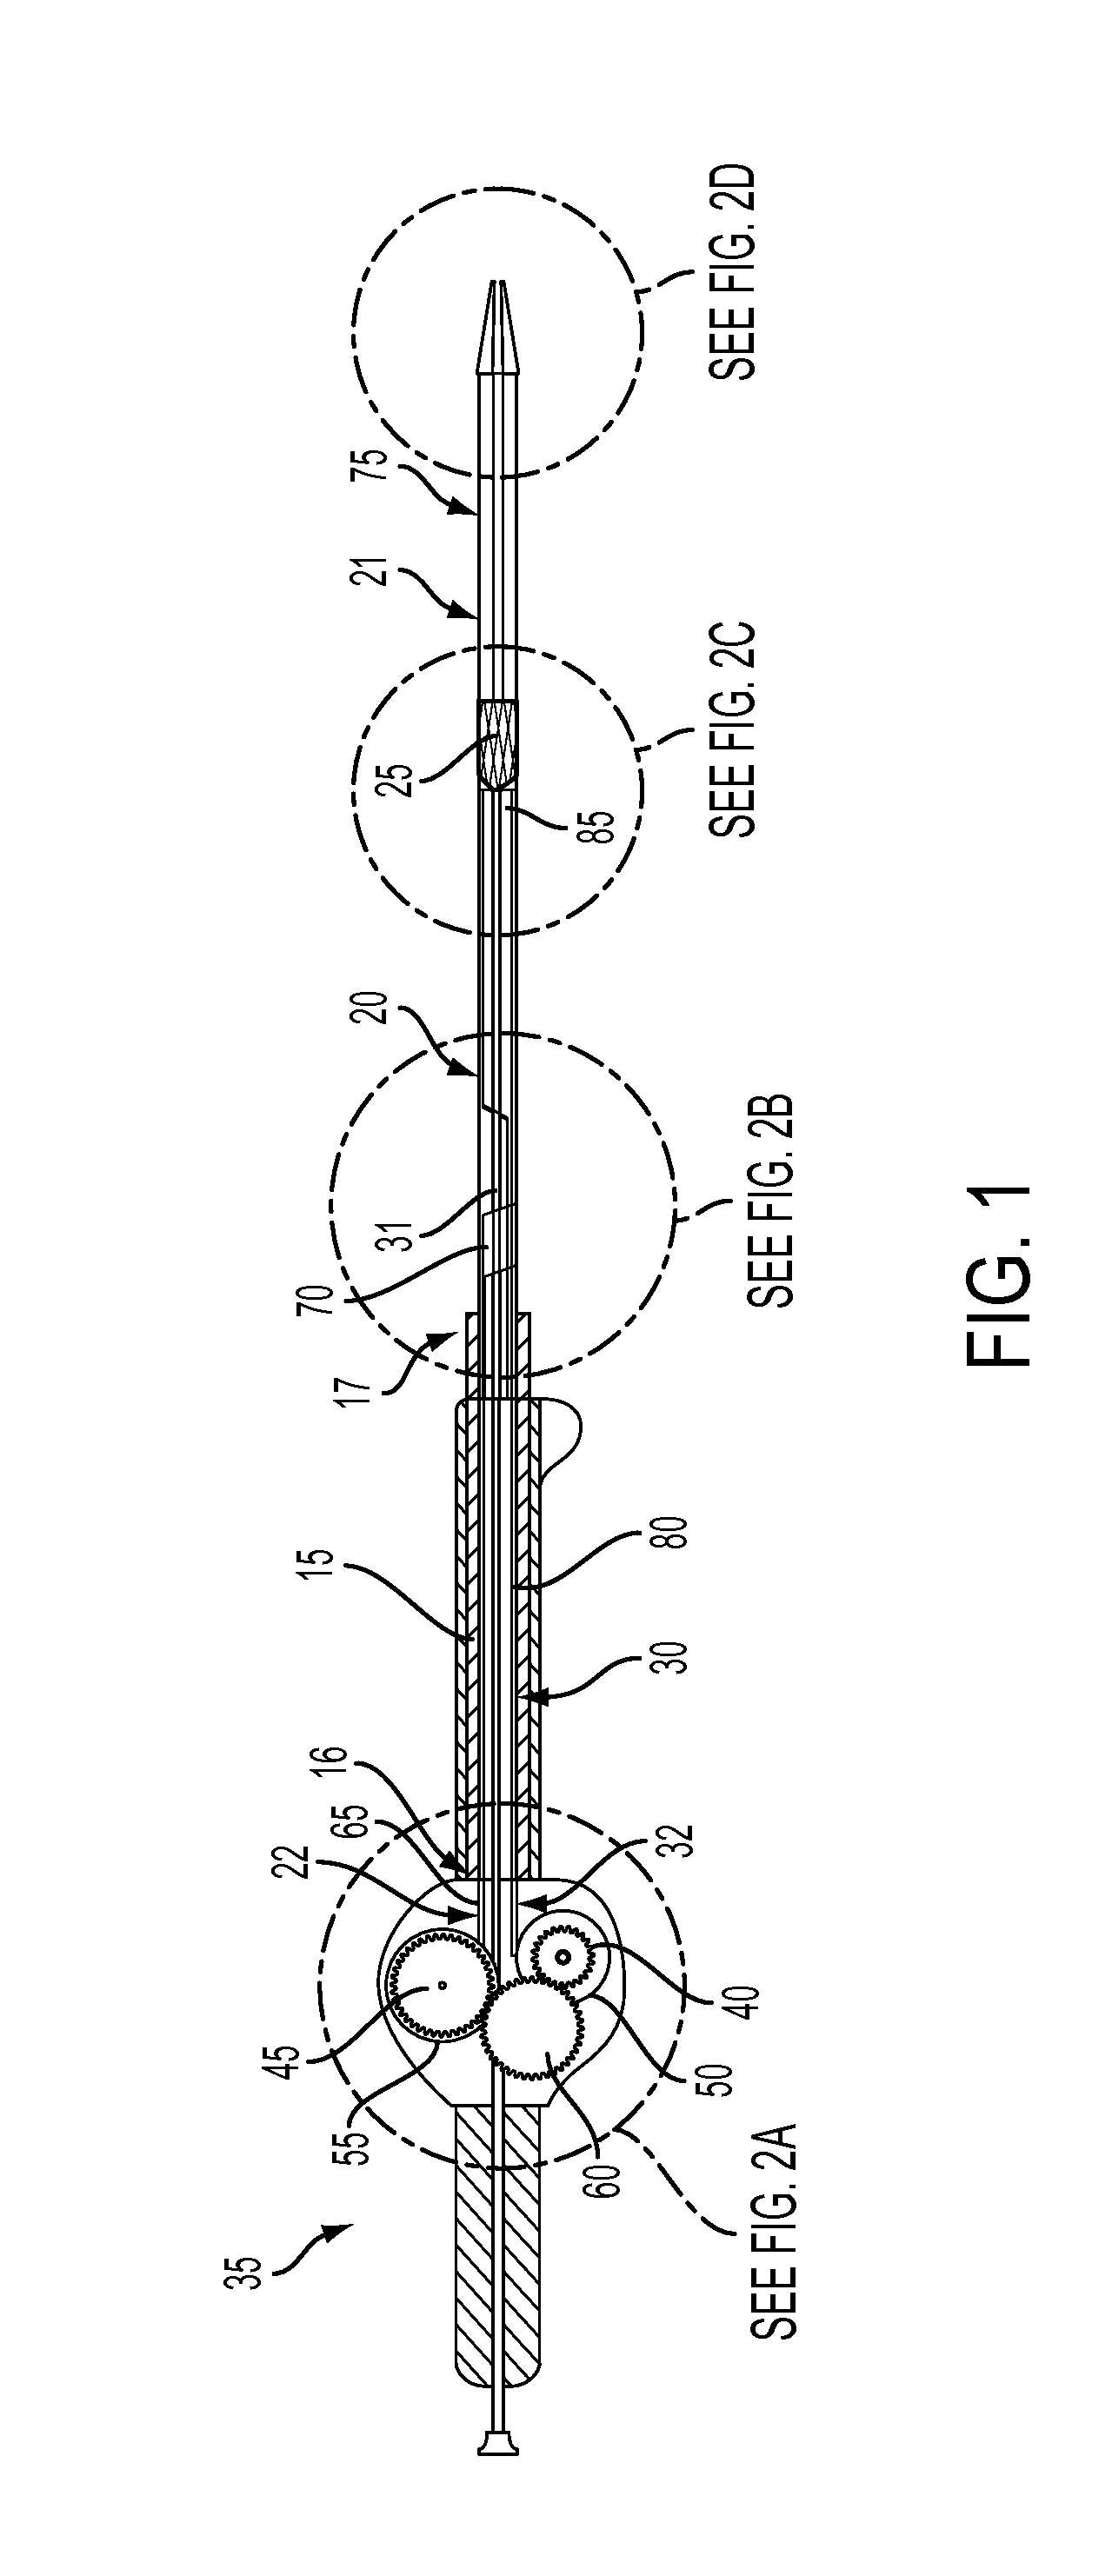 Stent deployment device and methods for use